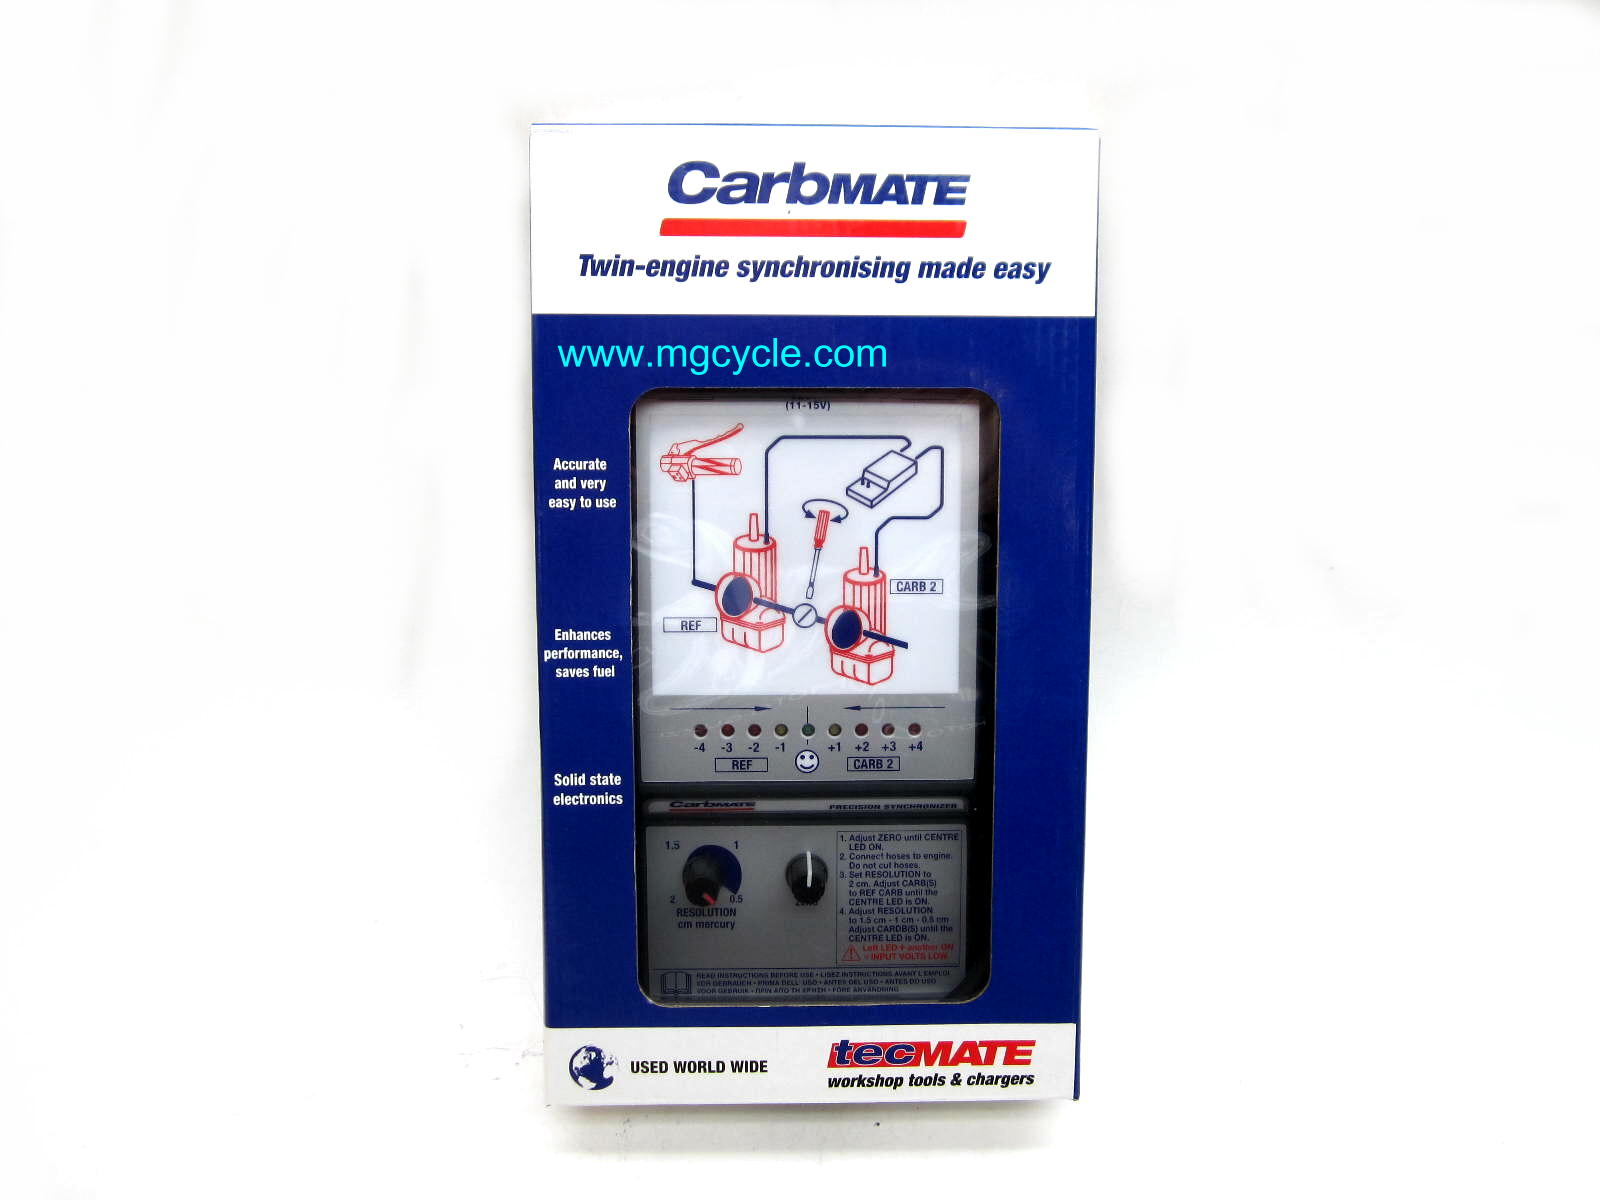 Carbmate electronic carburetor and throttle body synchronizer